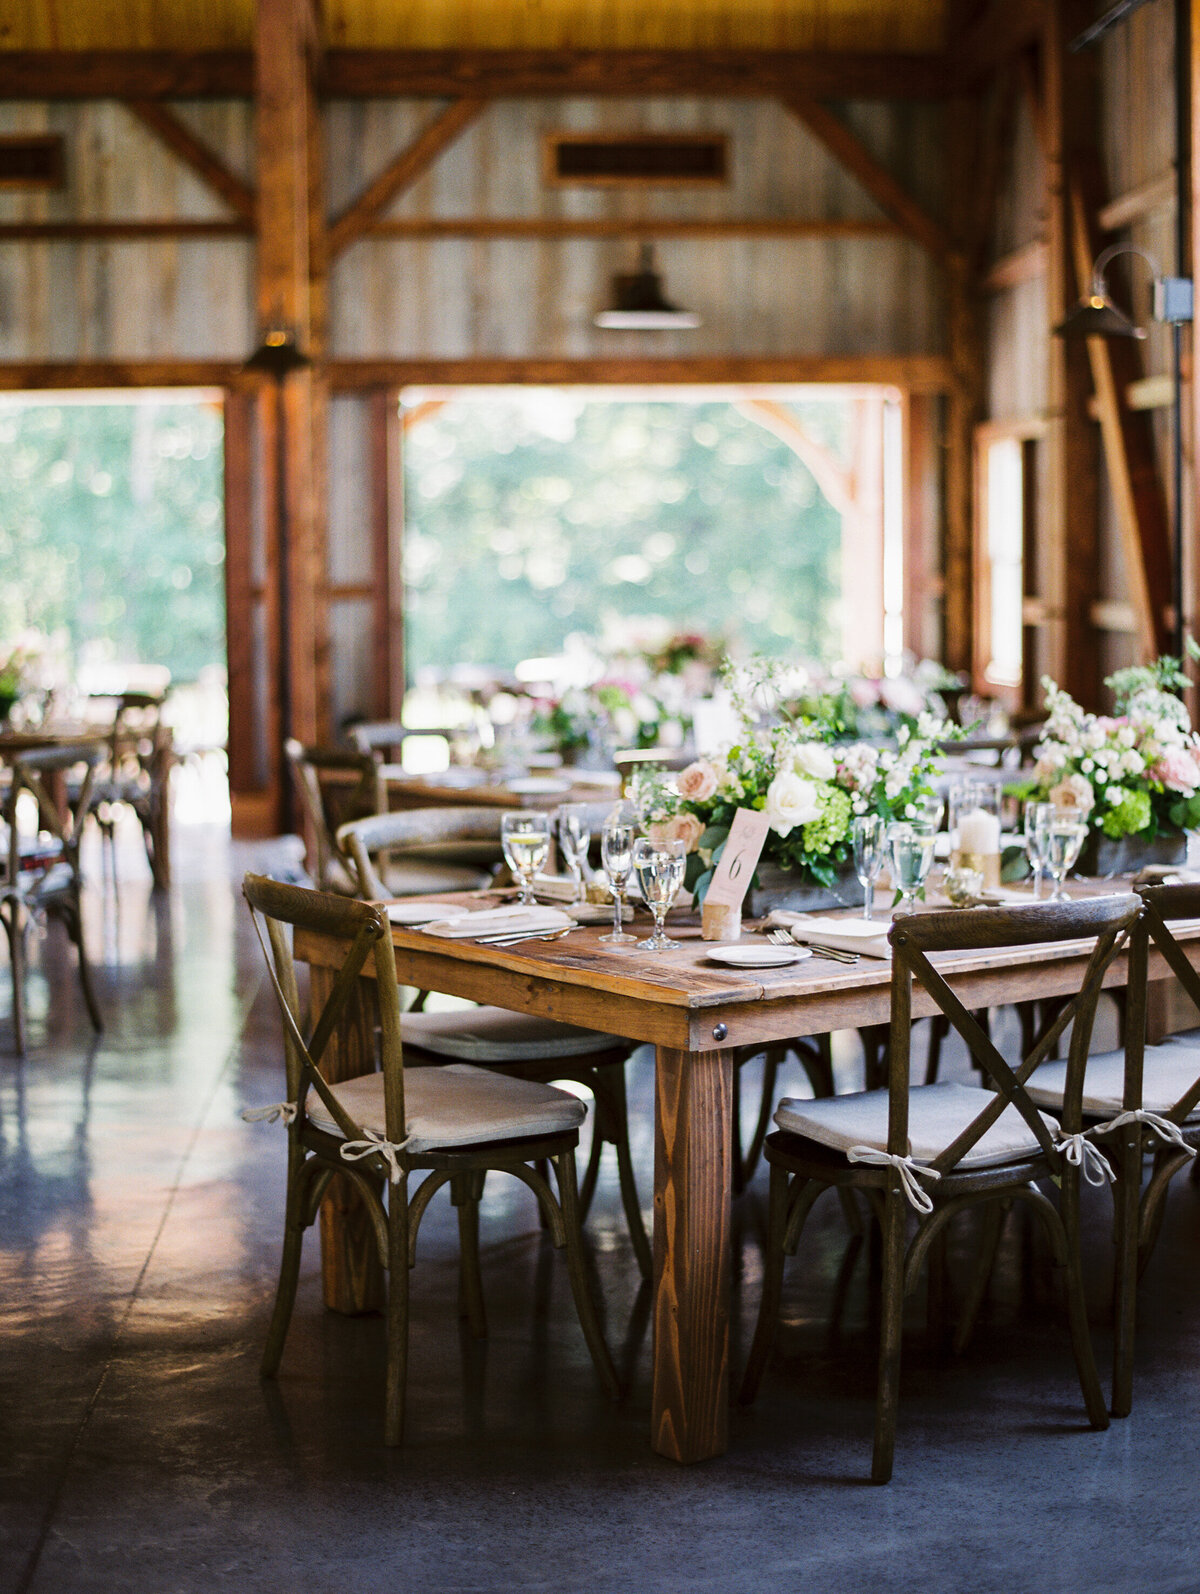 Wooden tables and chairs with floral centerpieces